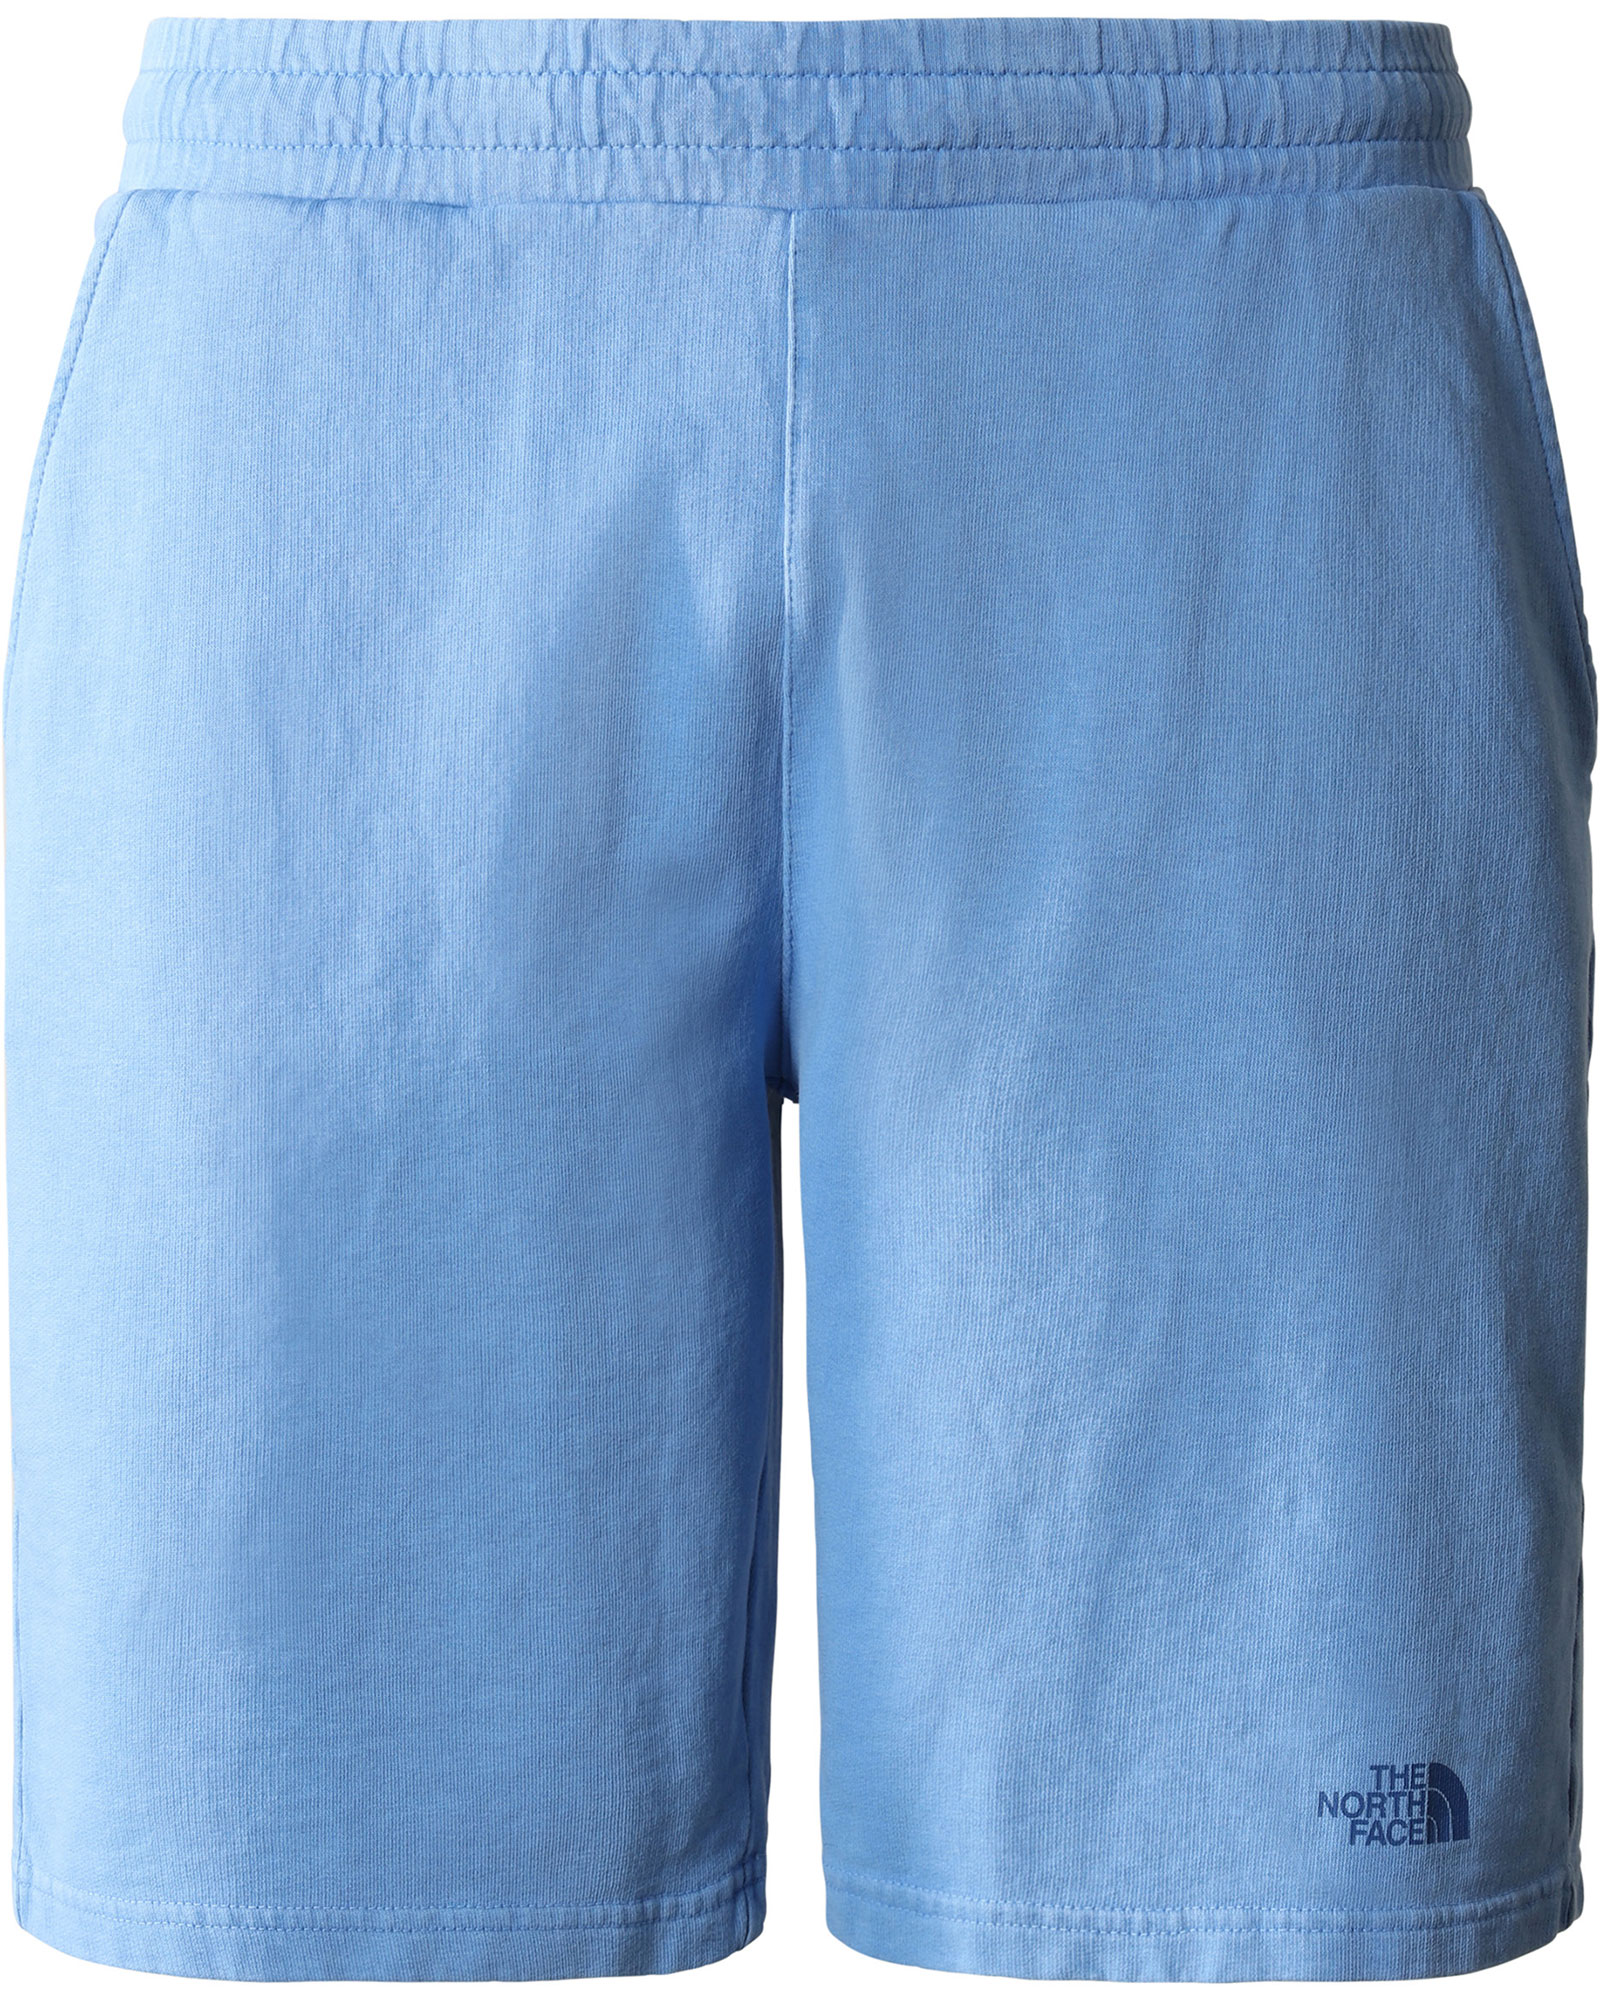 The North Face Men’s Heritage Dye Pack Shorts - Super Sonic Blue XL